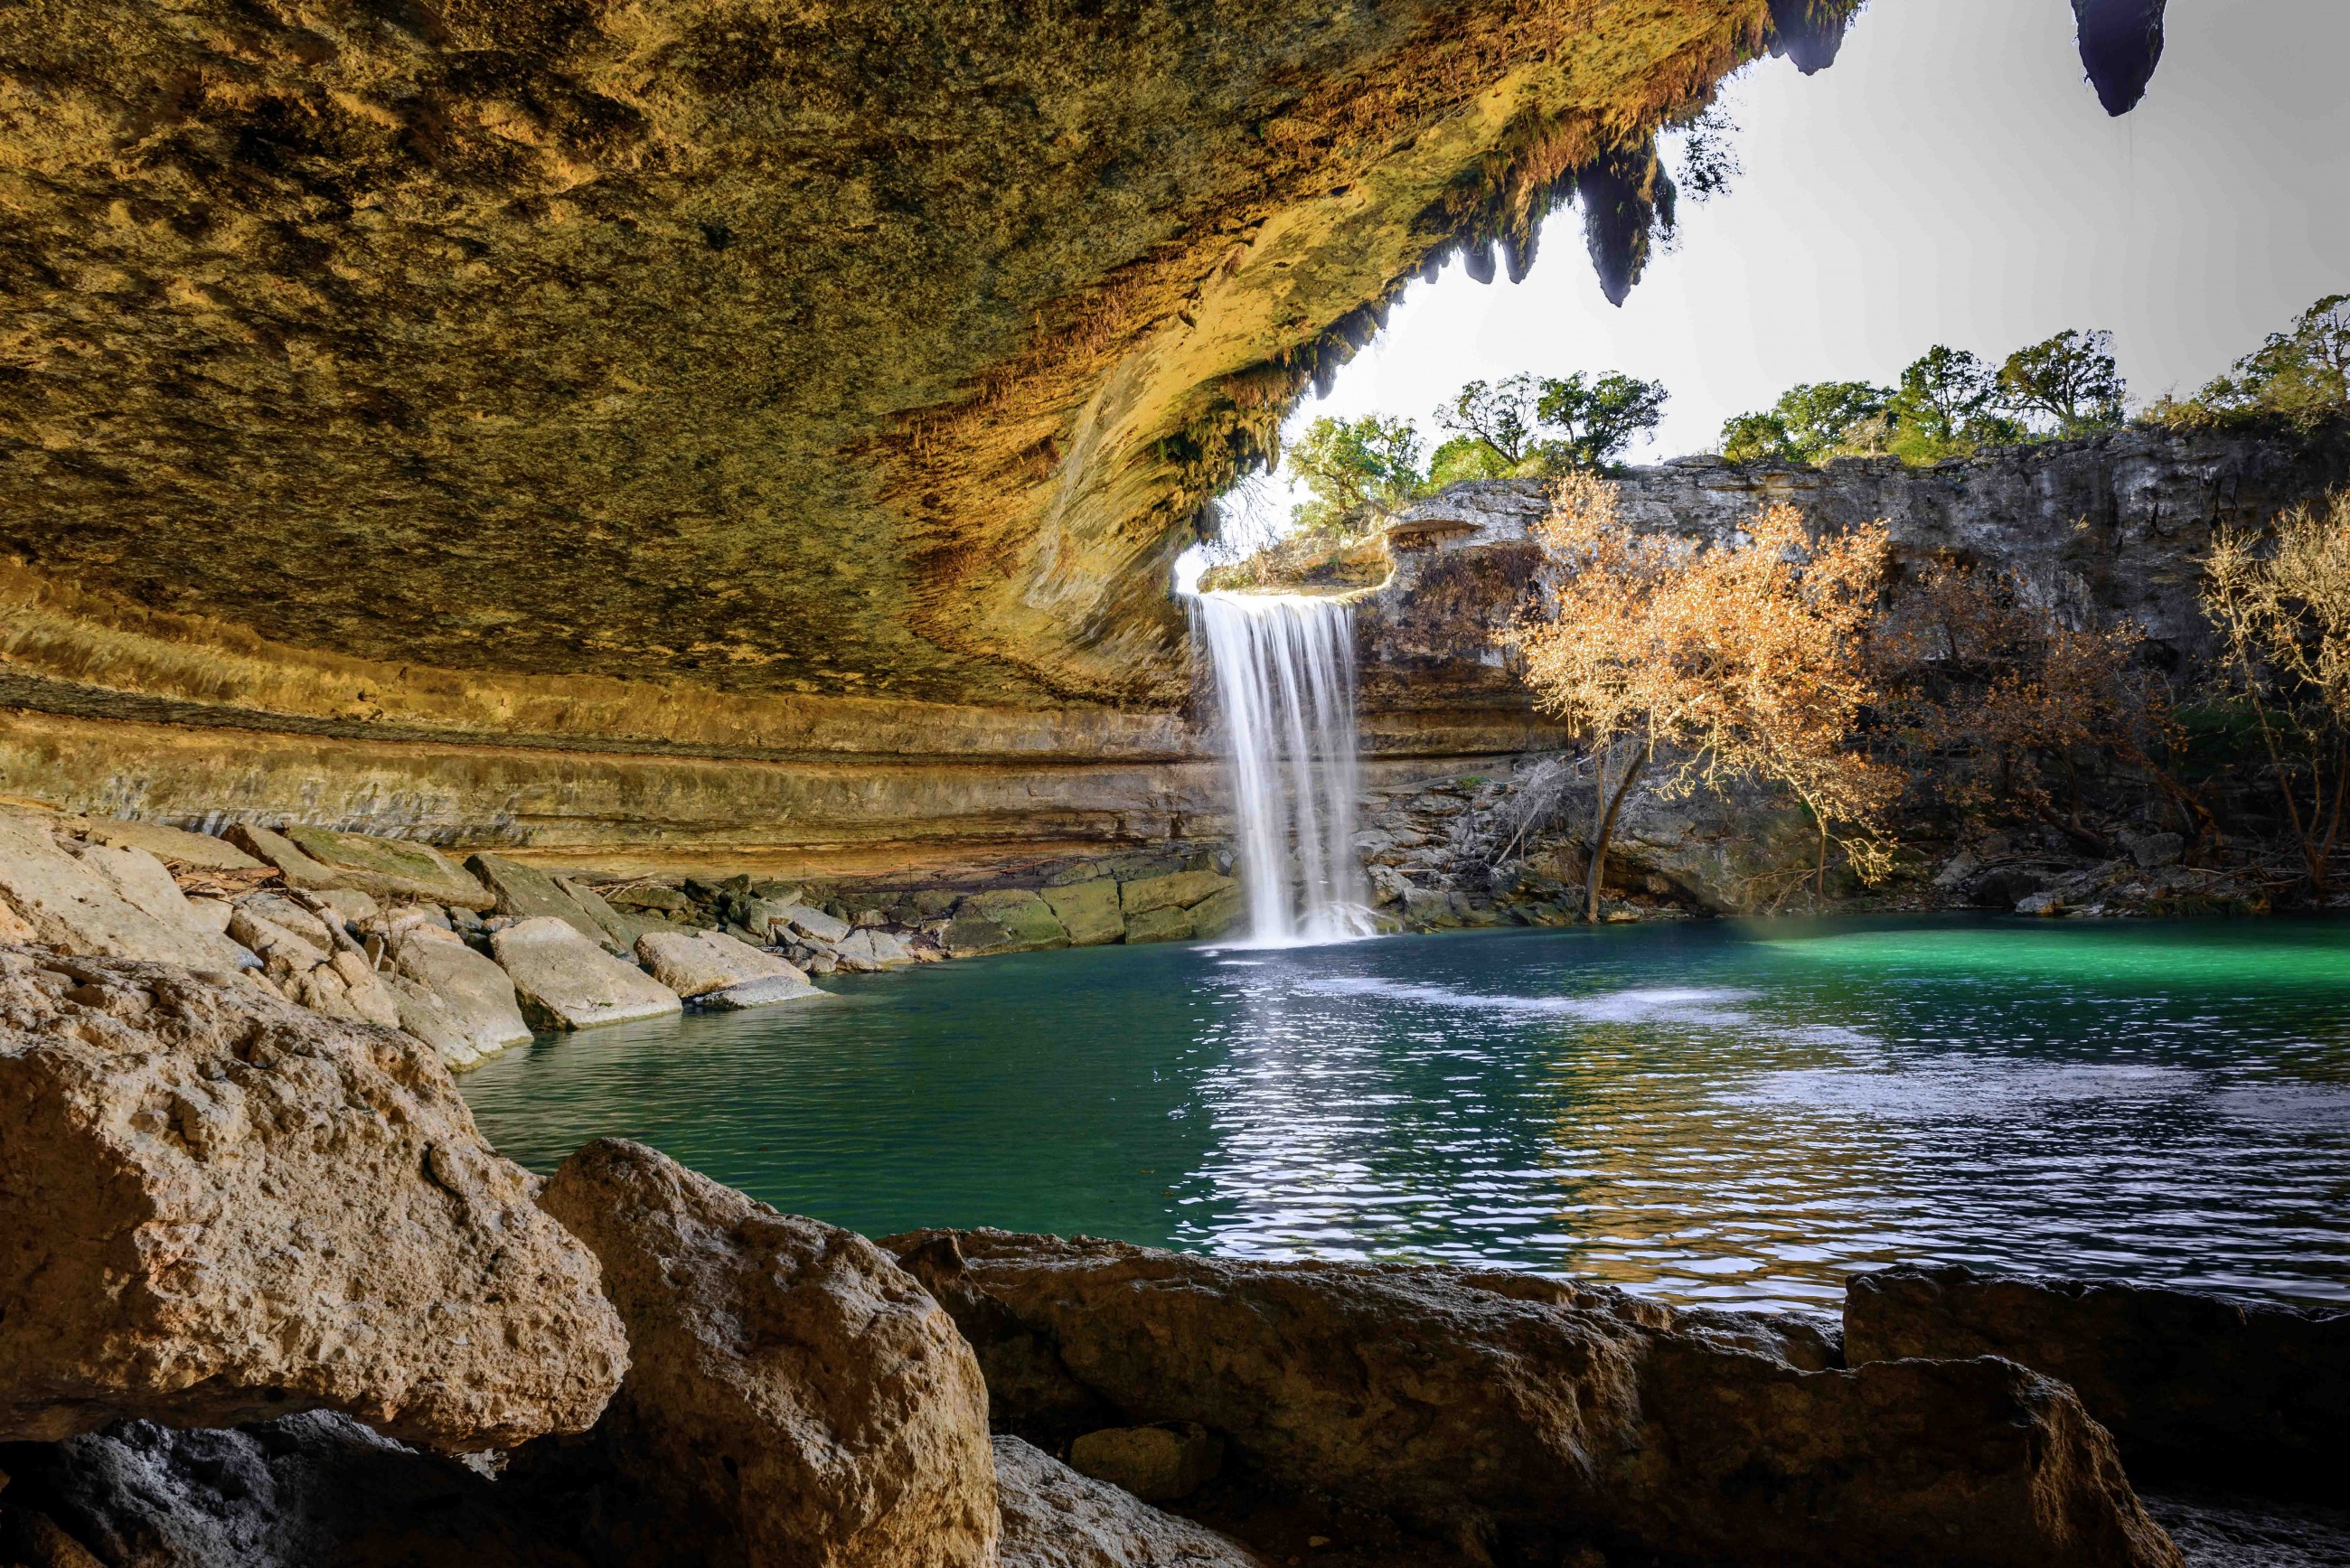 No swimming at Hamilton Pool this summer due to falling rocks from winter storm